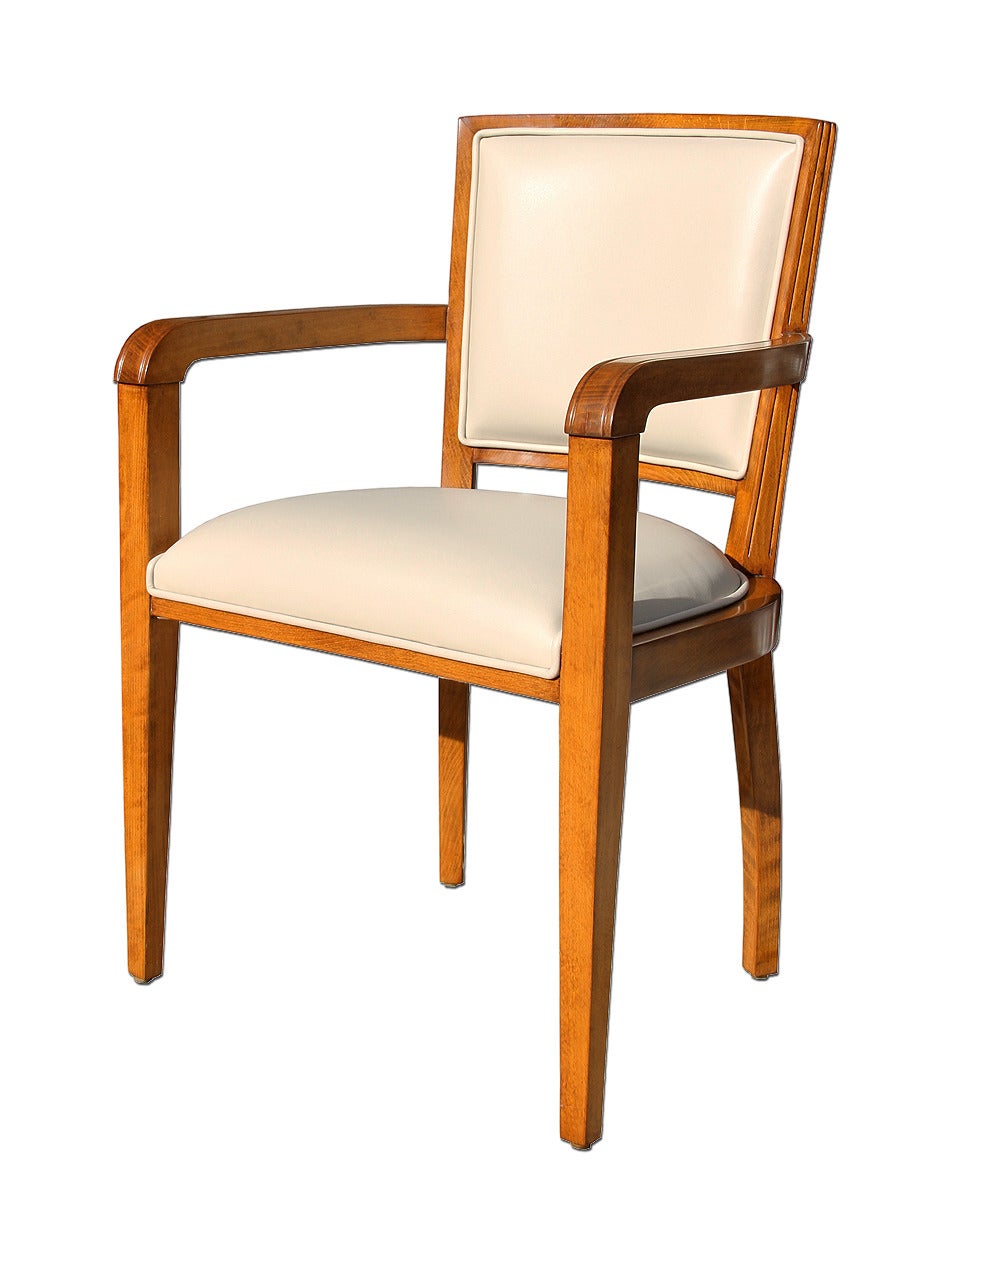 One beautiful 1940s era Art Deco desk chair from French Governmental Institute.

This beechwood Art Deco chair has been beautifully refinished with a natural satin varnish and wax and reupholstered with a natural cream off-white leather. The